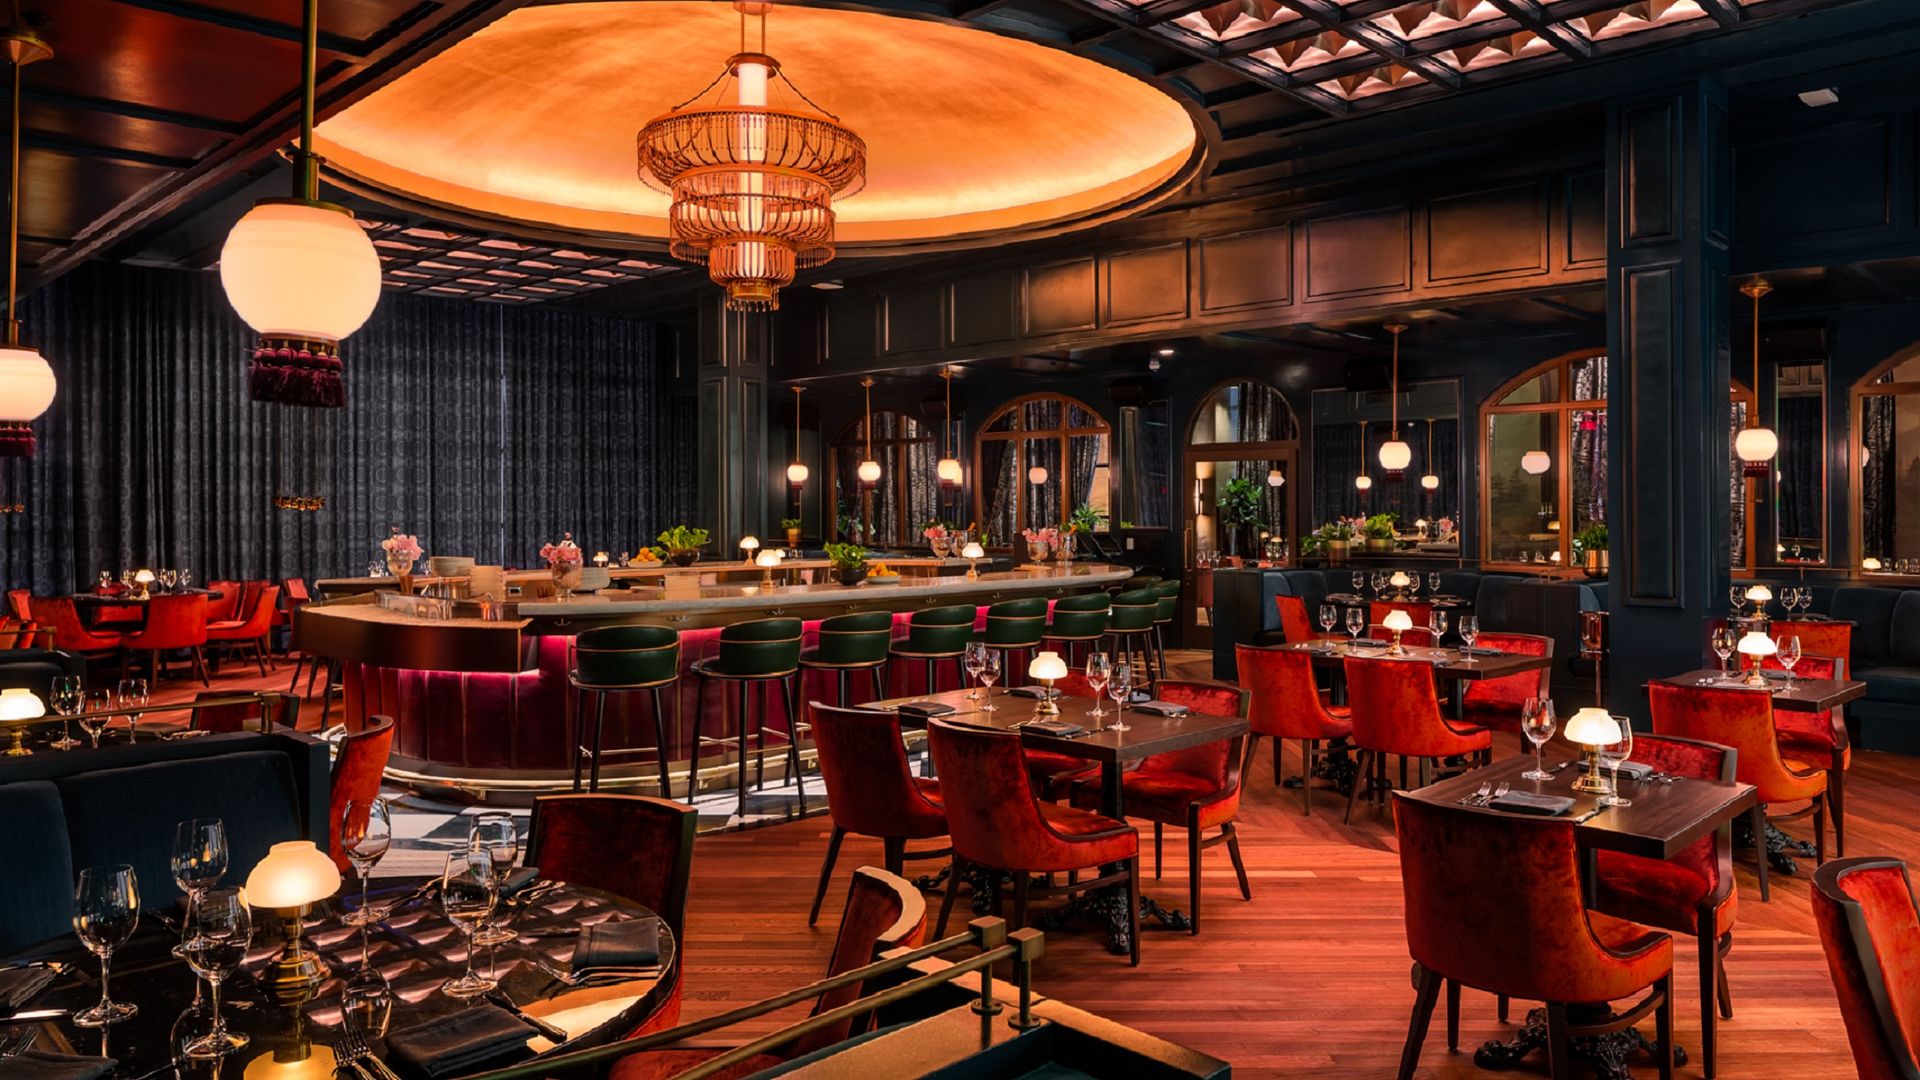 Image of the opulent Supper Club restaurant. It shows a center bar surrounded by tables.